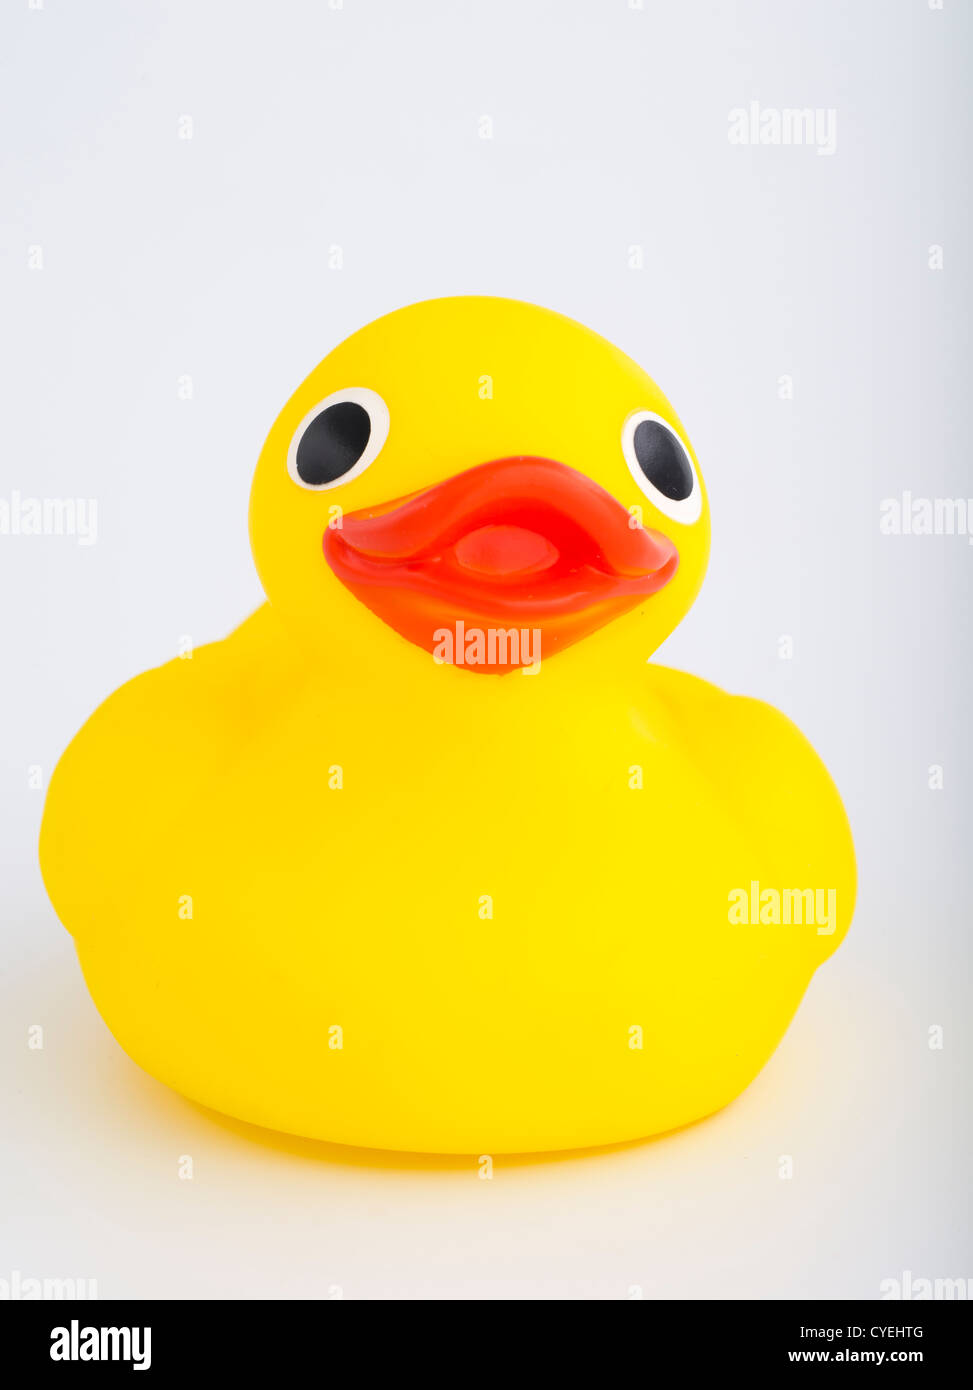 Yellow Rubber Ducky bath toy Stock Photo